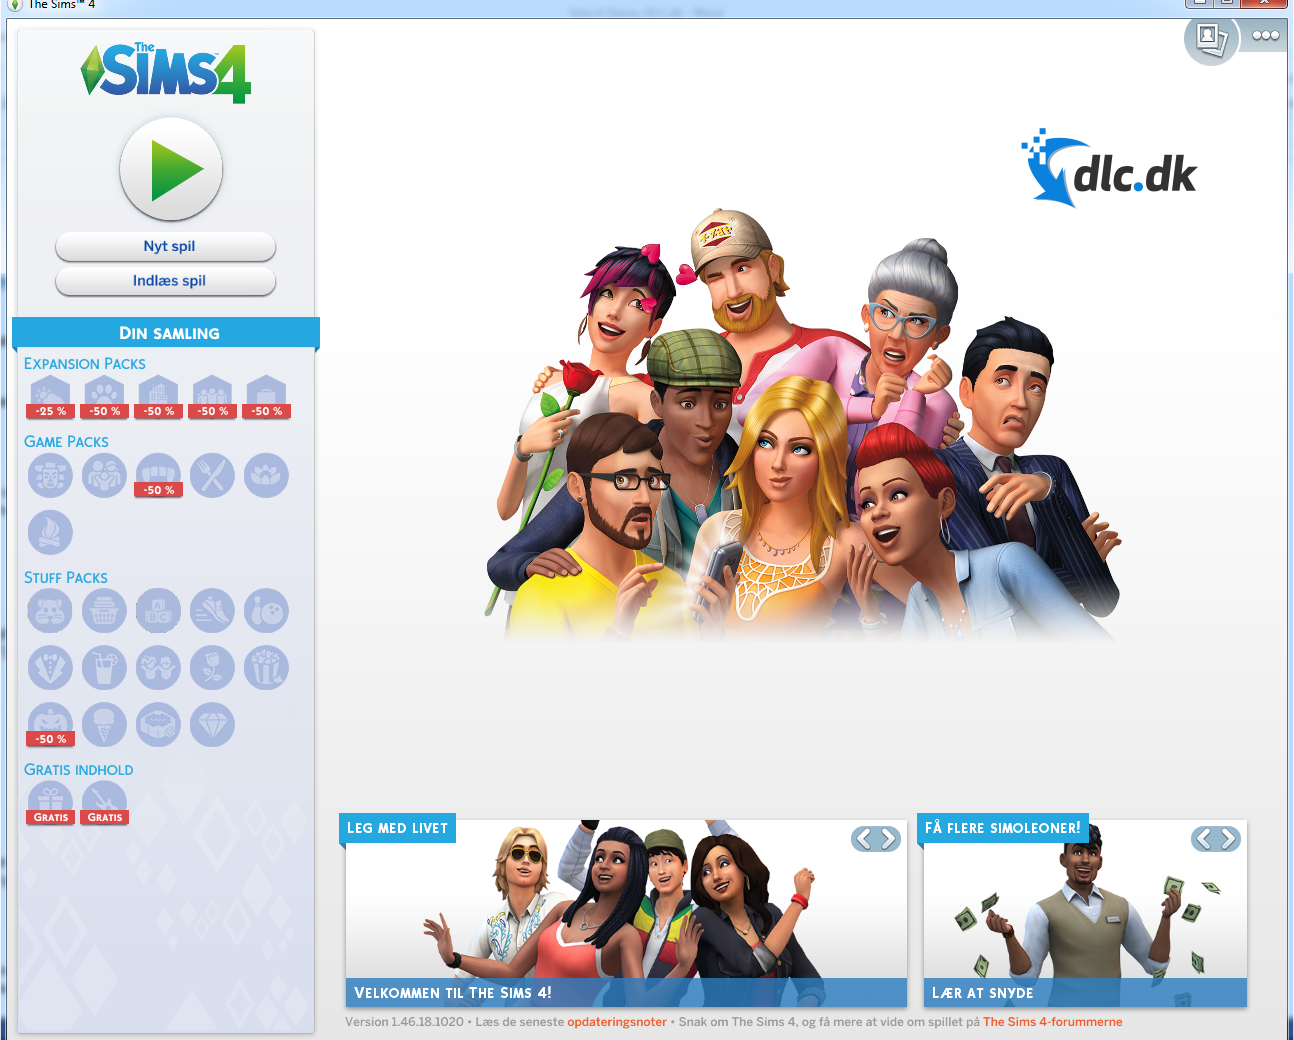 The sims 4 mac download size 2018